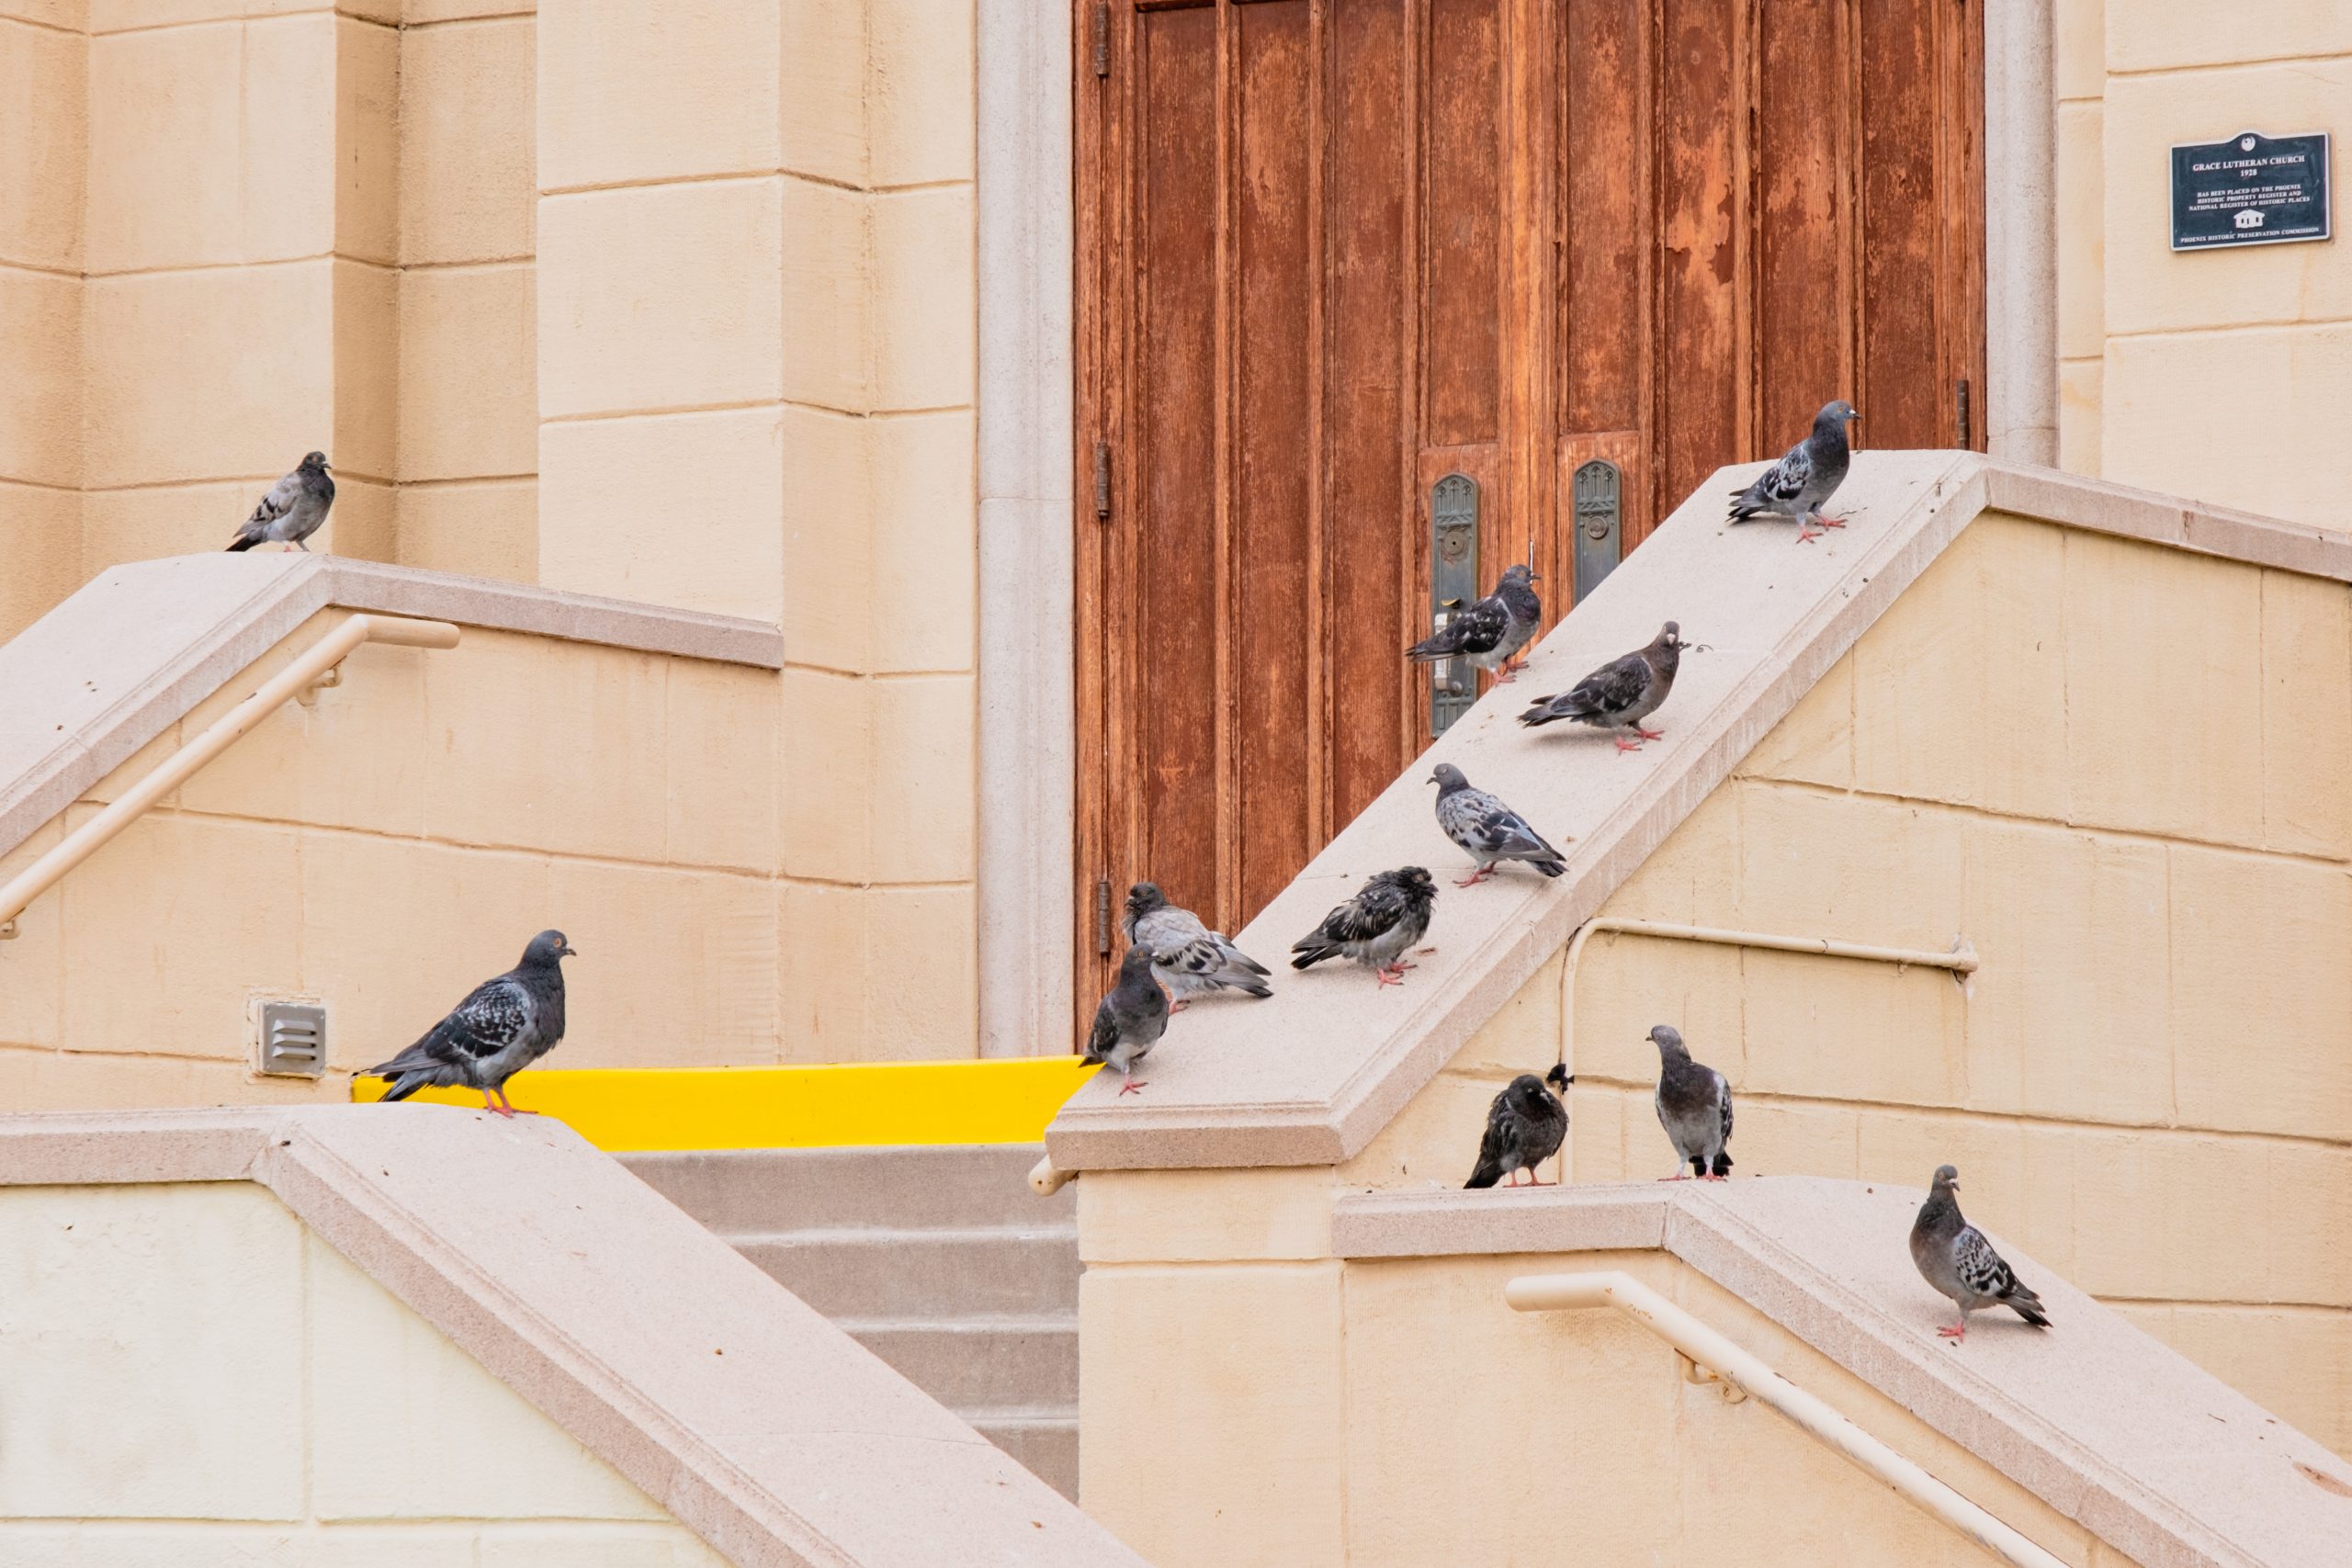 Photograph of a flock of pigeons sitting and standing on and around some stairs leading up to a door.